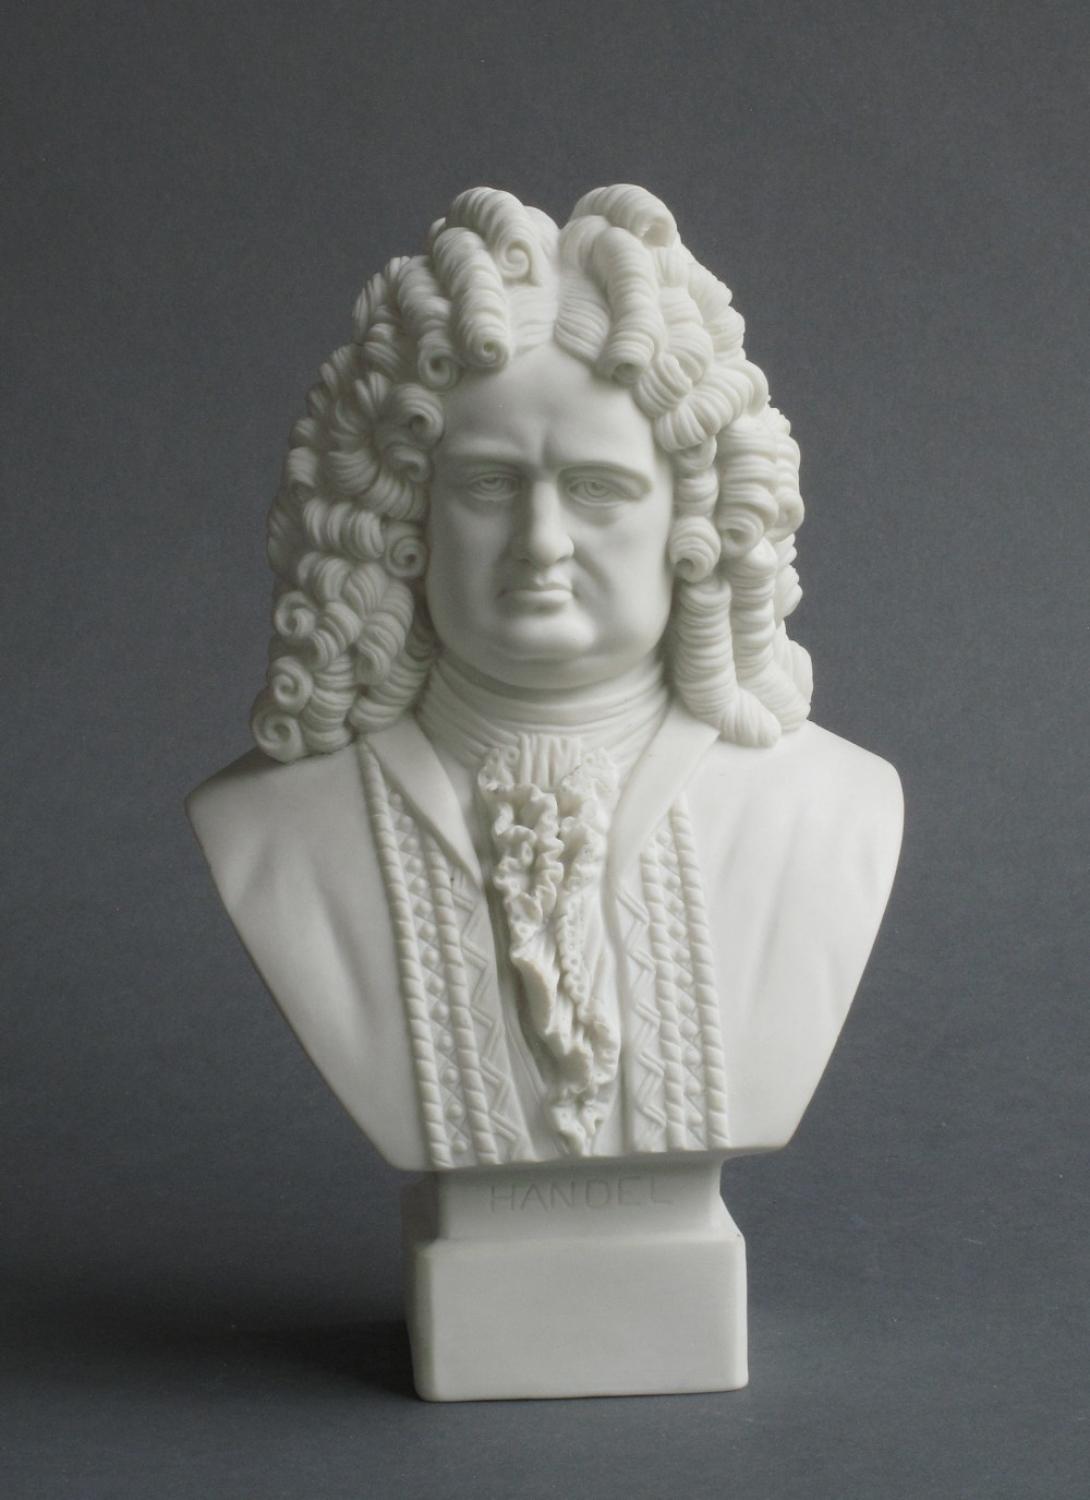 Robinson and Leadbeater bust of Handel